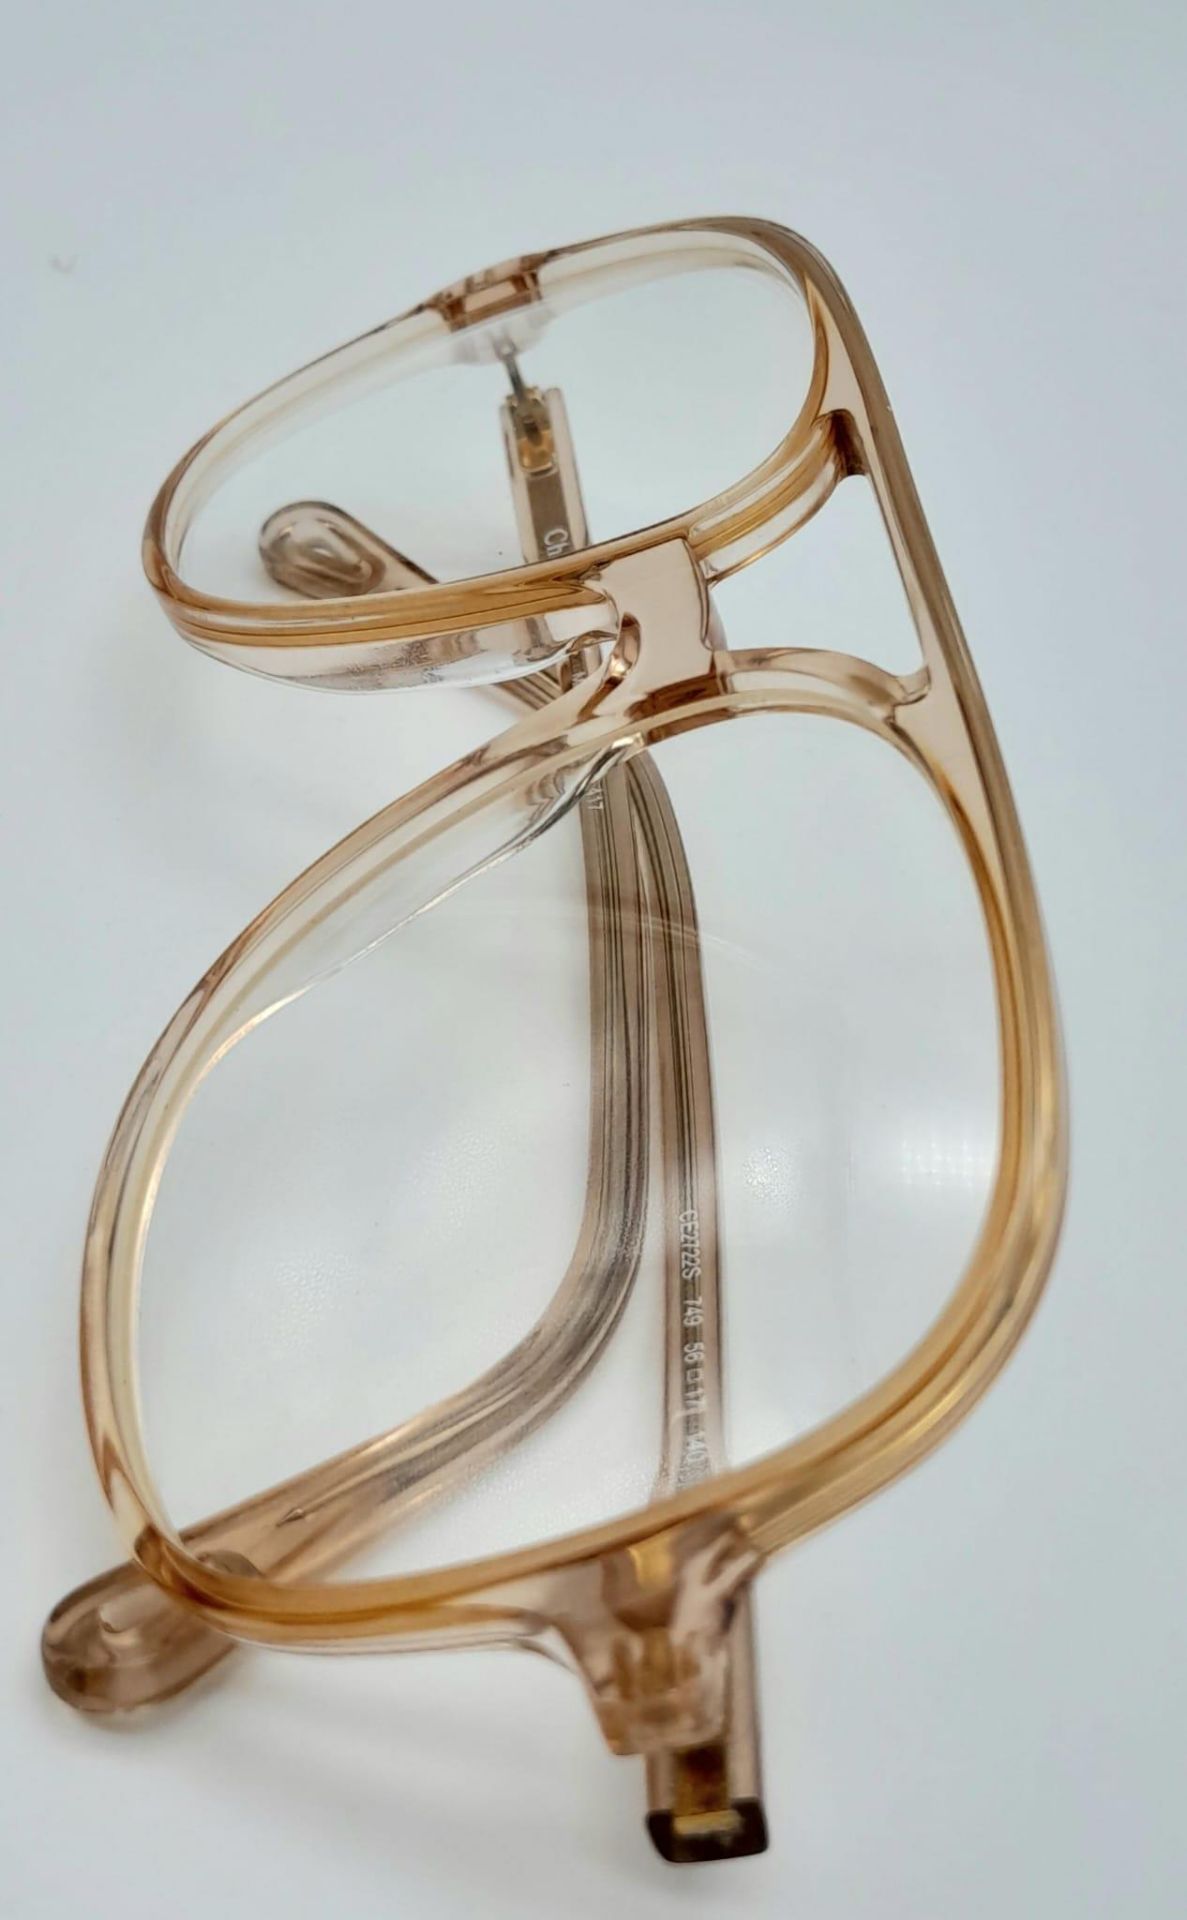 Chloe 'Patty' Eyeglasses. Large navigator shape/style and nude colour, Patty brings a 70s-inspired - Bild 4 aus 11